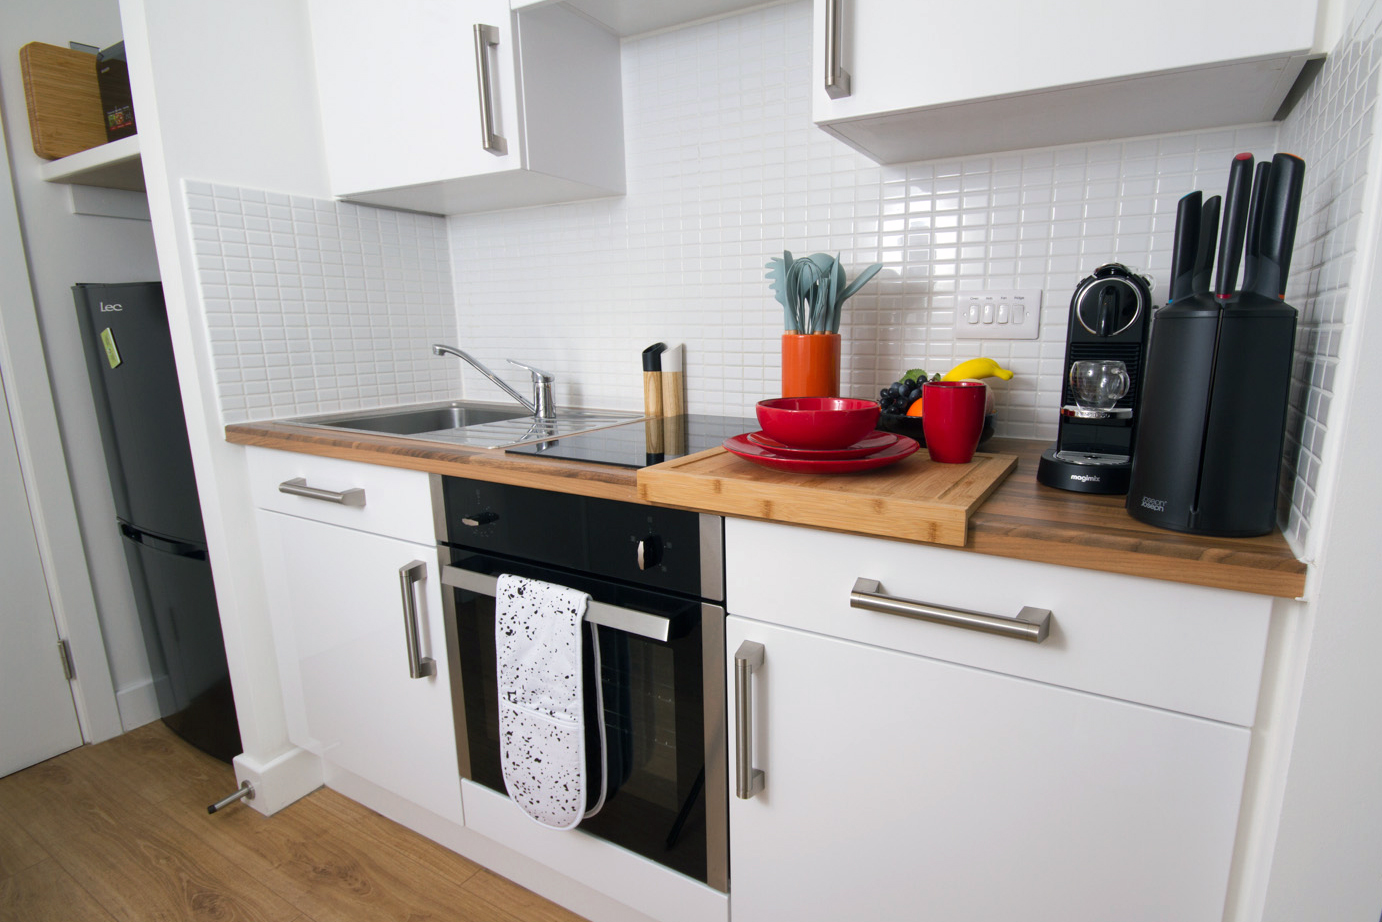 Deluxe Studio Kitchen at CODE Coventry Student Accommodation